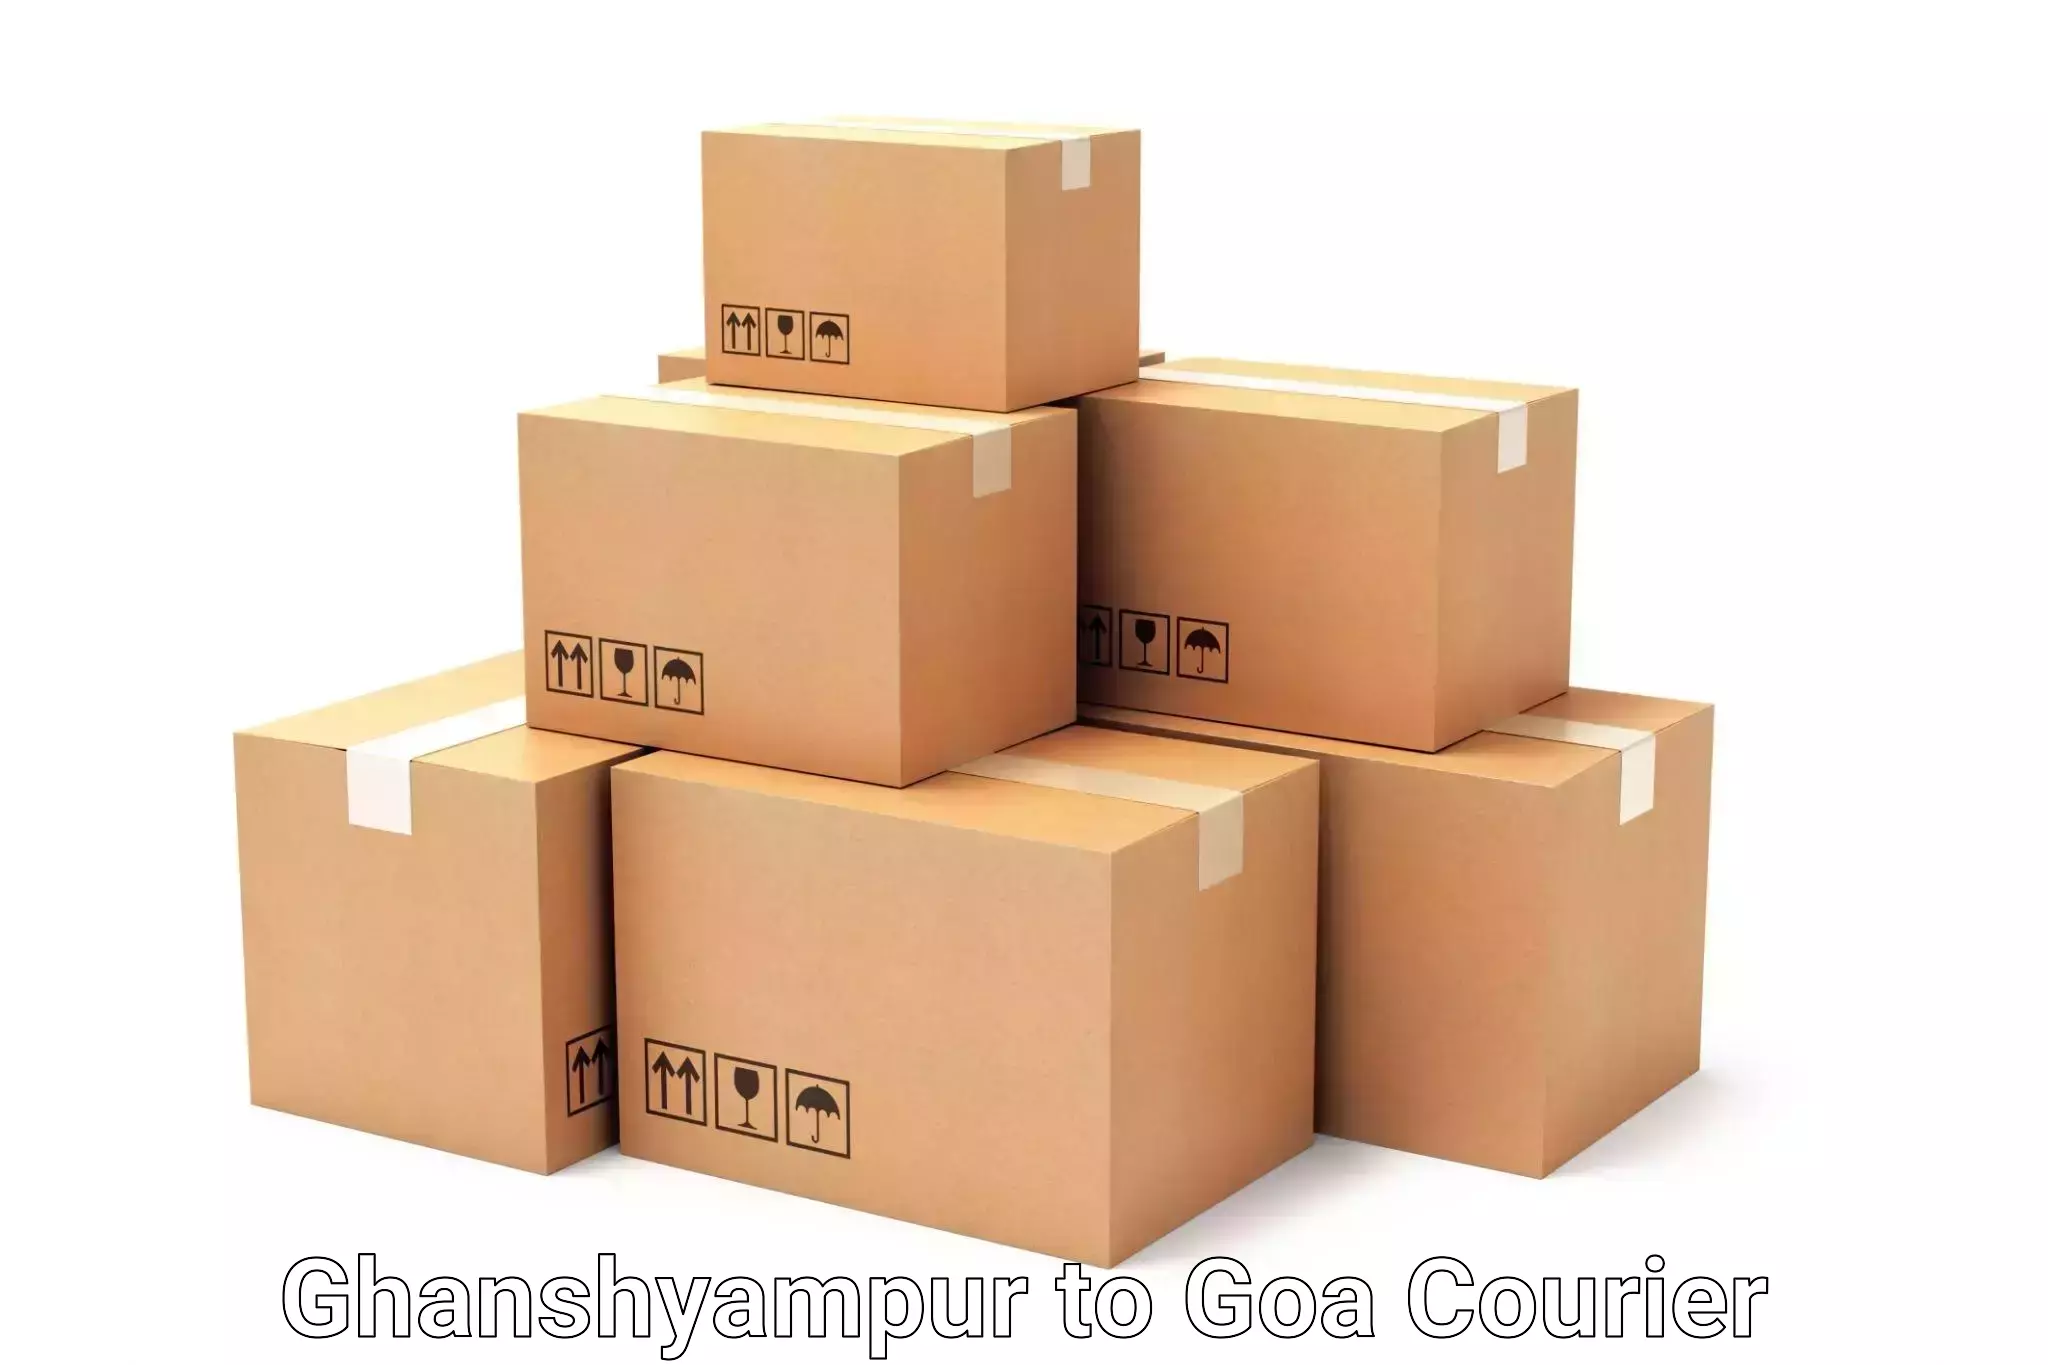 Luggage transport consulting Ghanshyampur to Goa